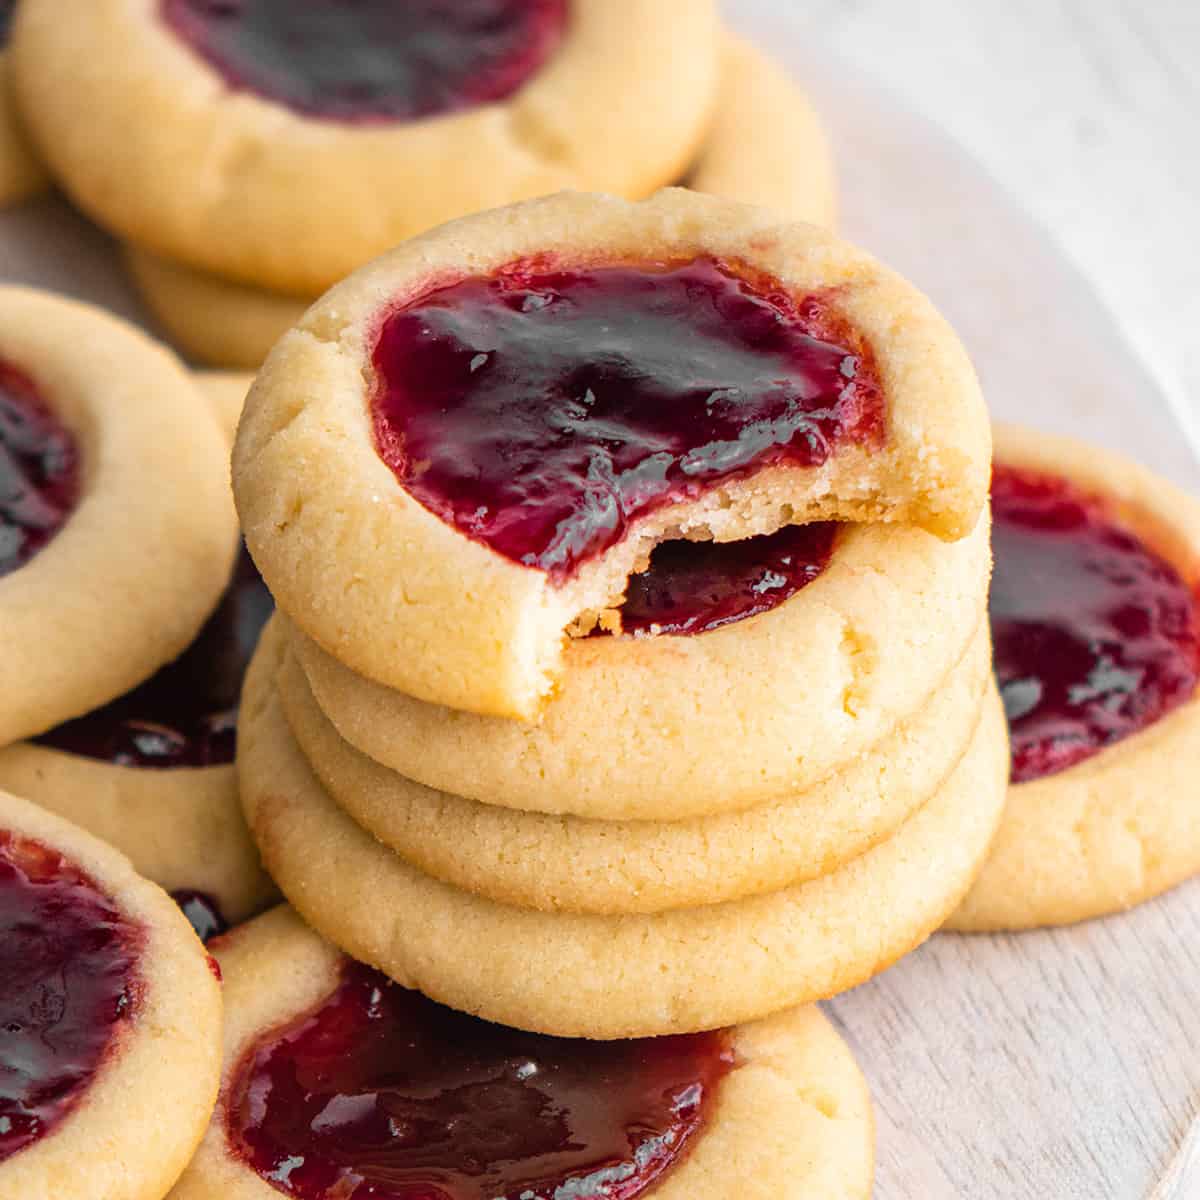 stack of four Thumbprint Cookies on top of other raspberry thumbprint cookies - top one has a bite taken out of it